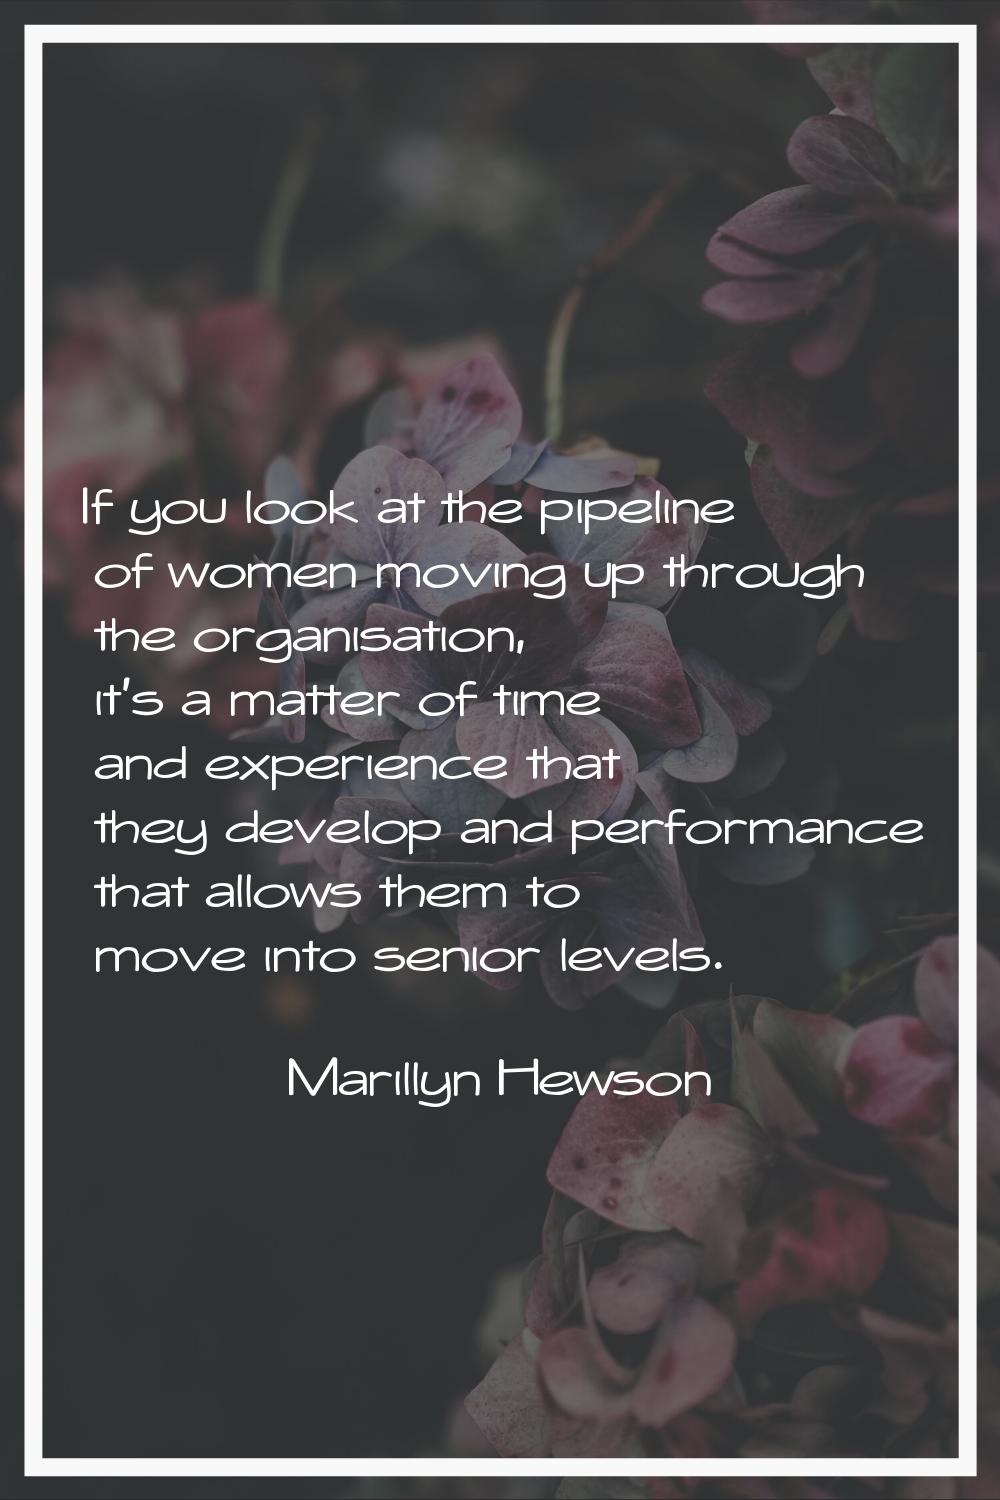 If you look at the pipeline of women moving up through the organisation, it's a matter of time and 